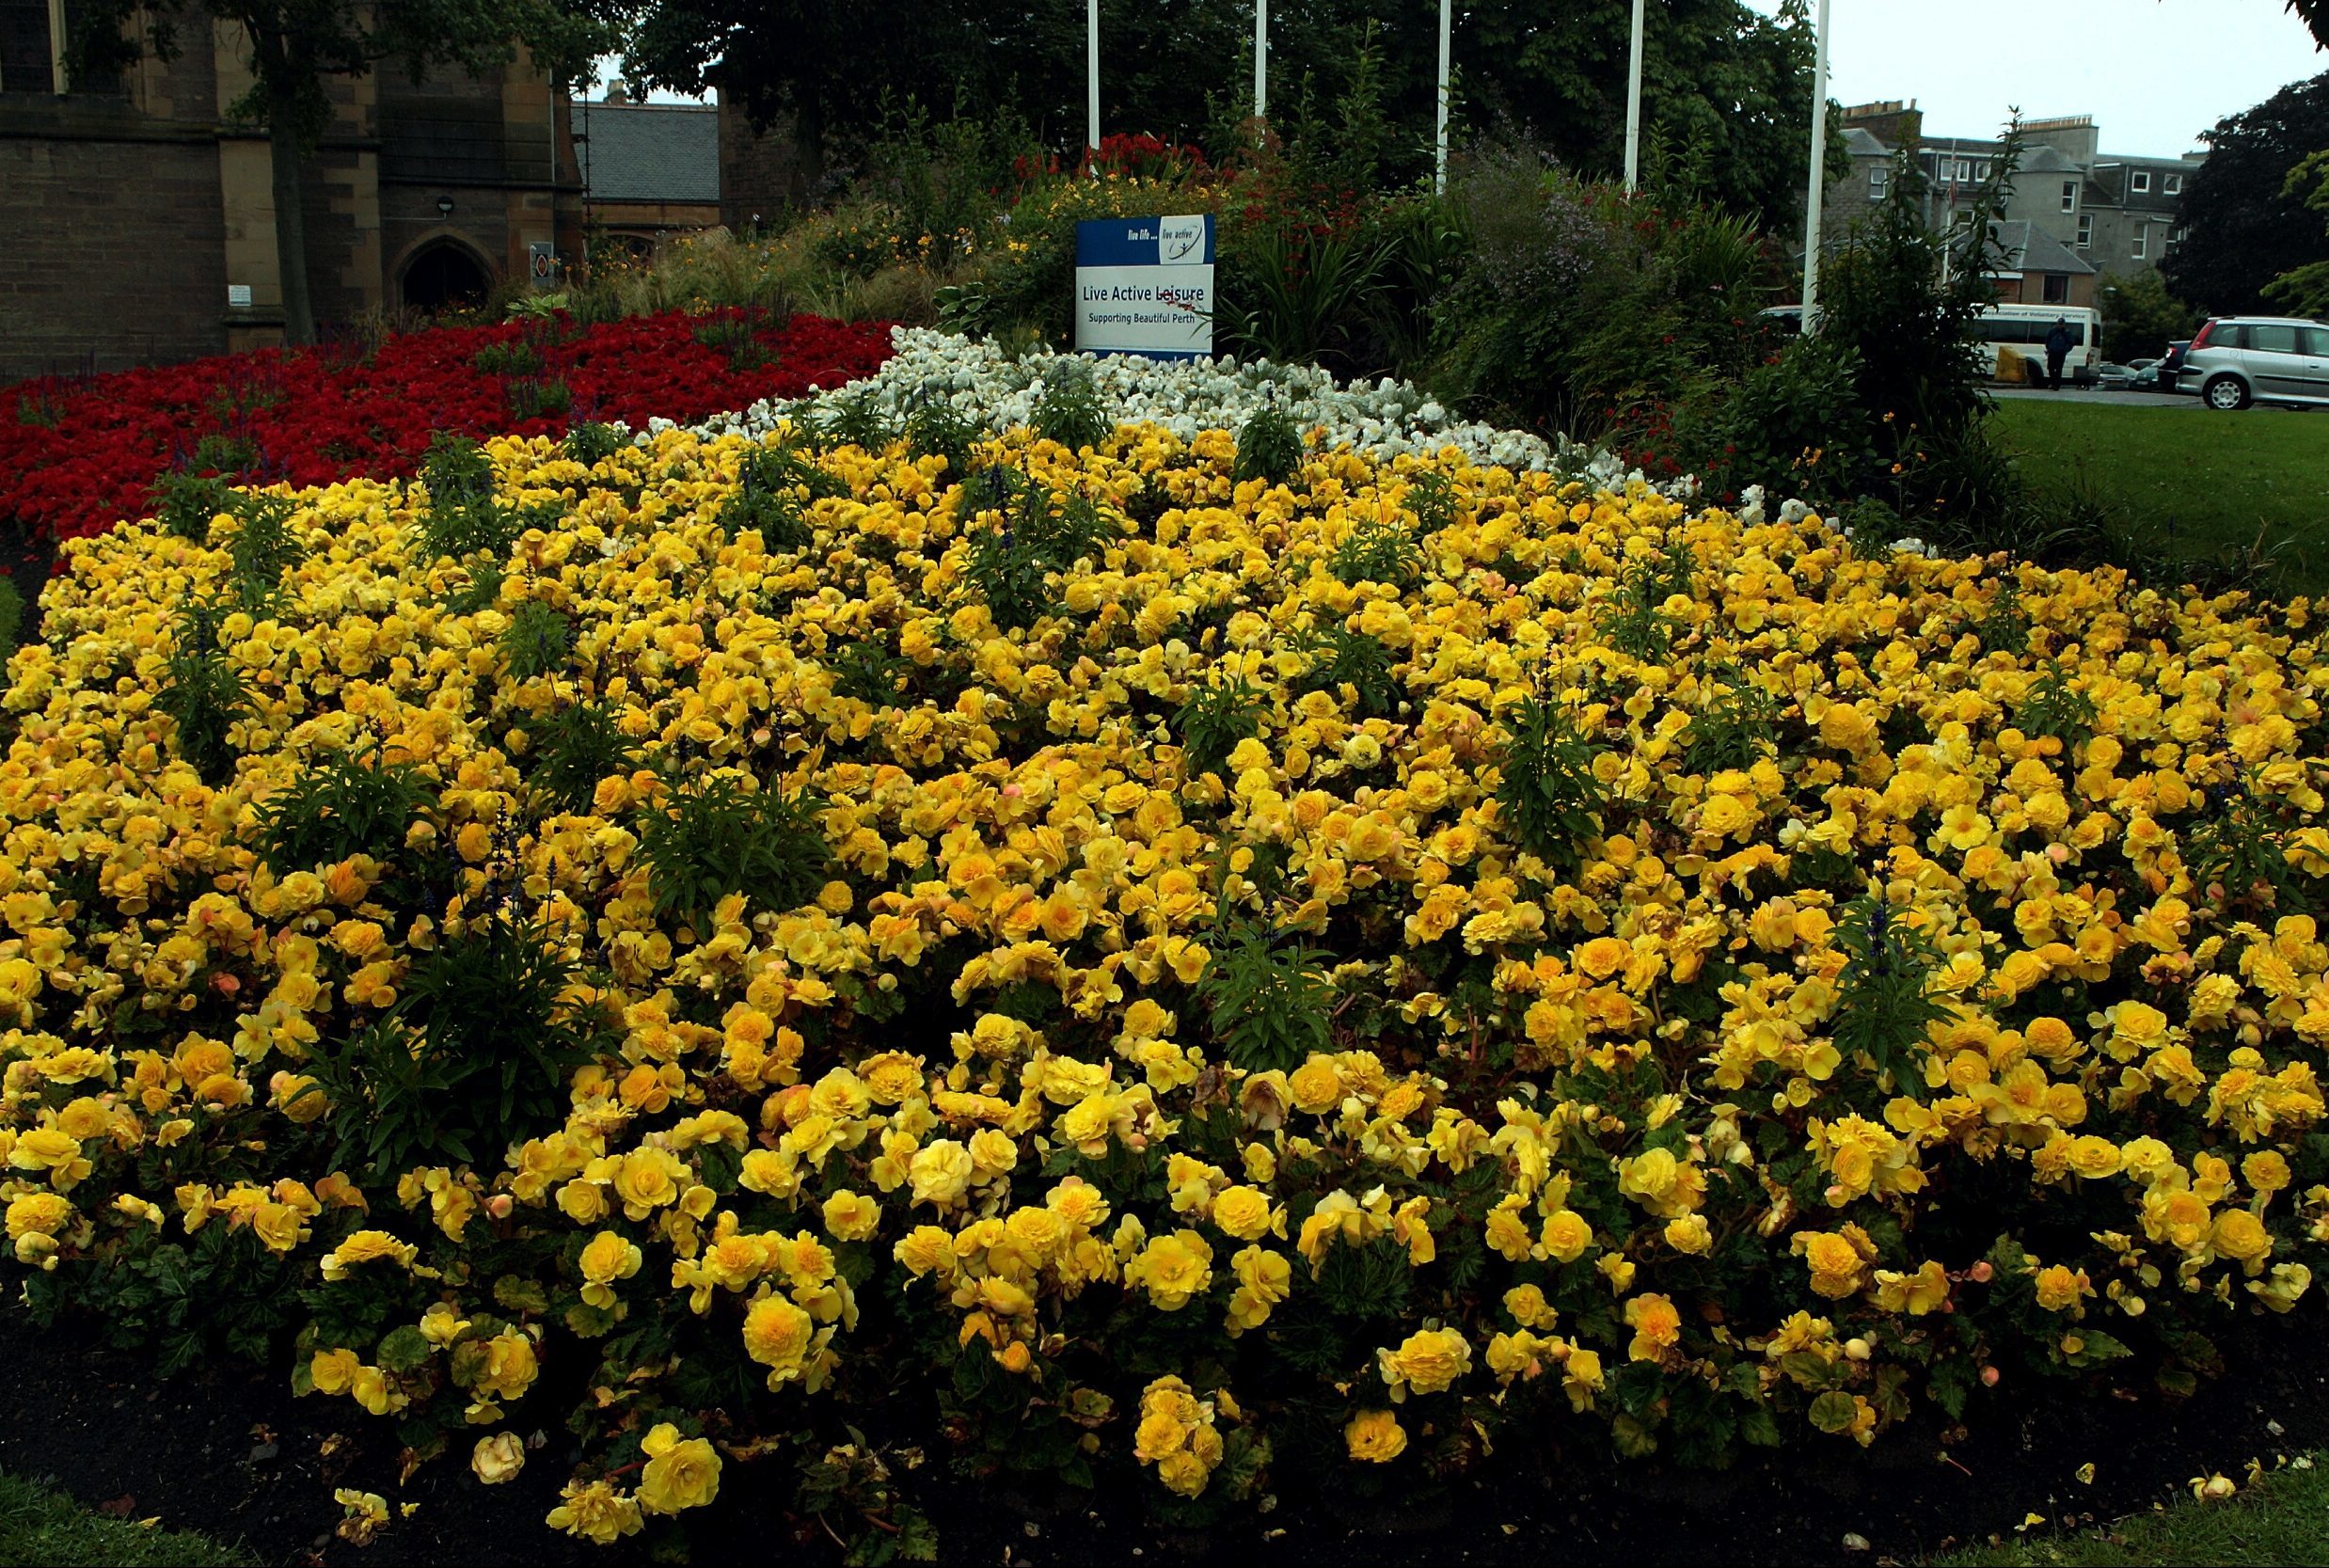 An example of Perth's floral efforts.